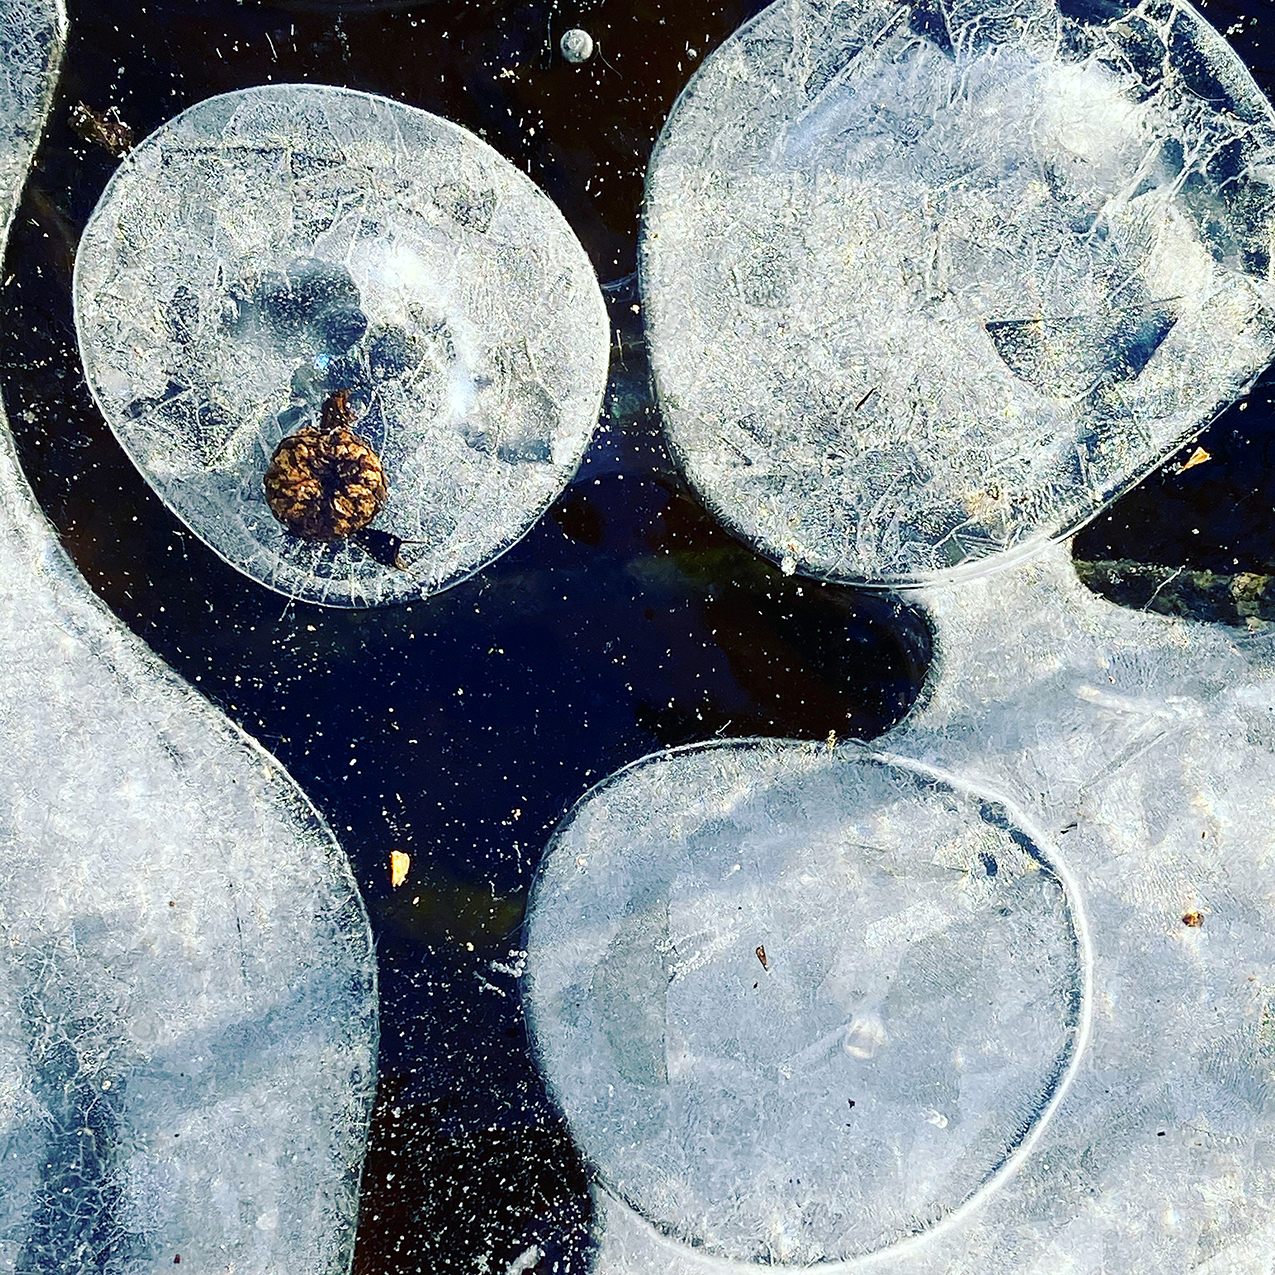 Woman Who Wears Her Heart Moon Full by Kelly DuMar: close-up photo of bubbles in ice that resemble human or alien figures